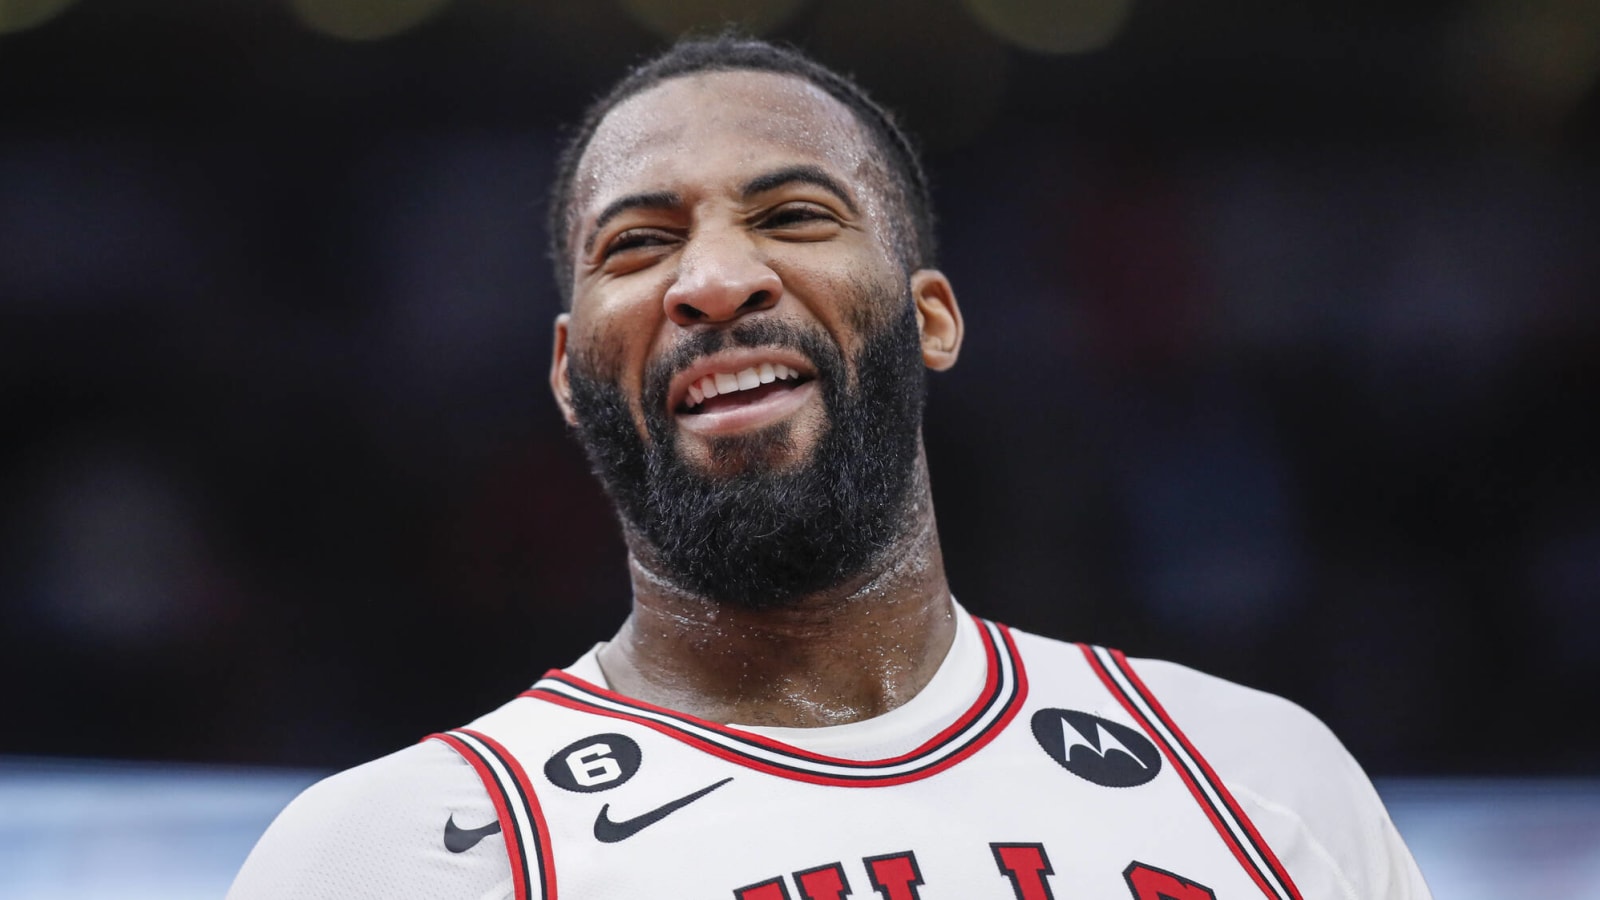 Watch: Bulls' Andre Drummond 'runs out of talent'